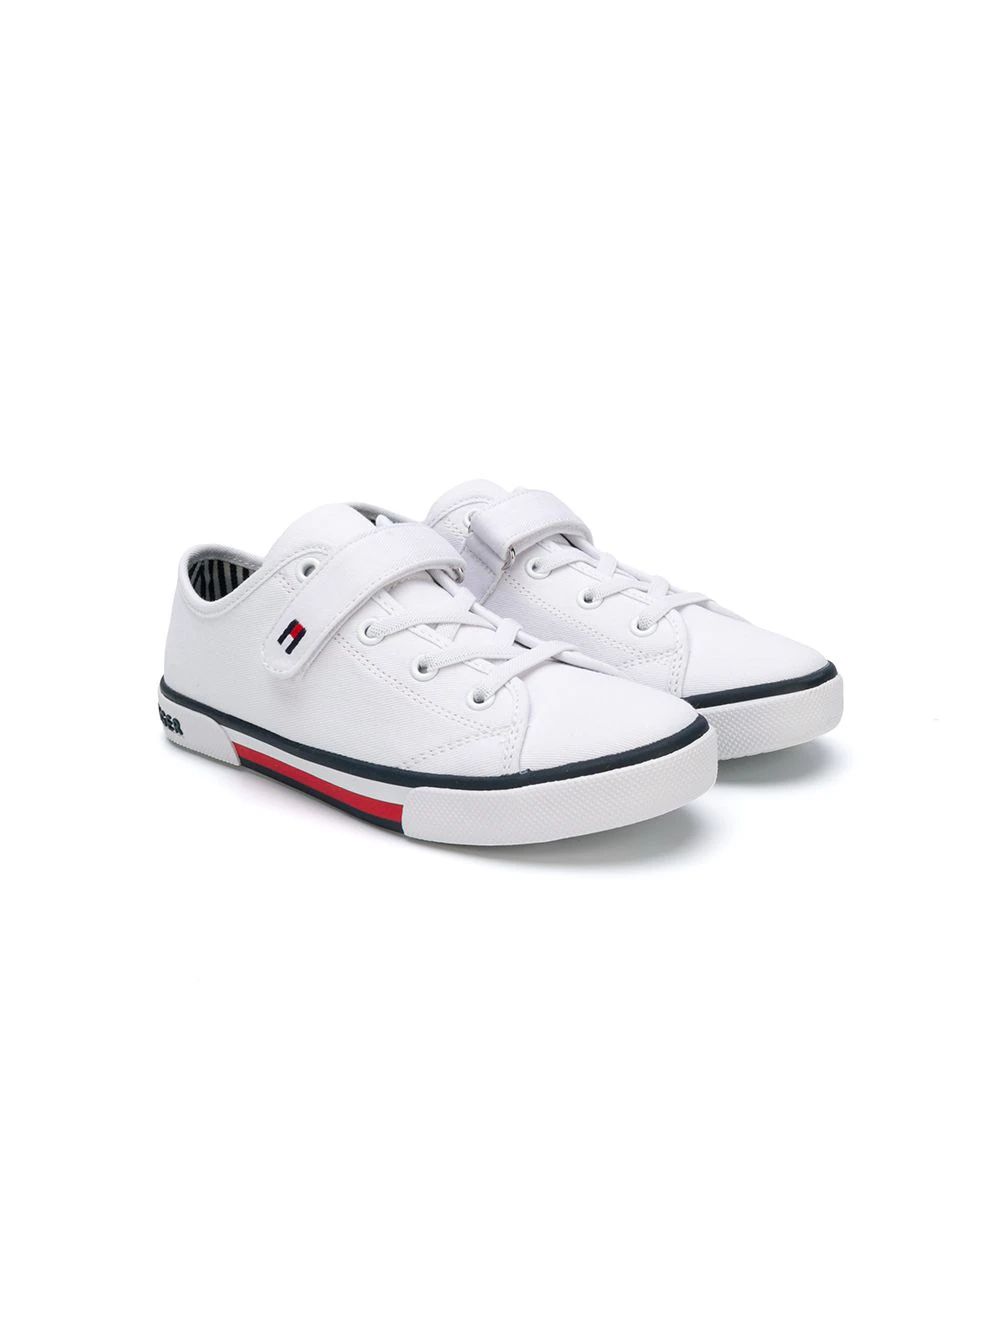 Tommy Hilfiger Junior classic touch strap sneakers - White | FarFetch US